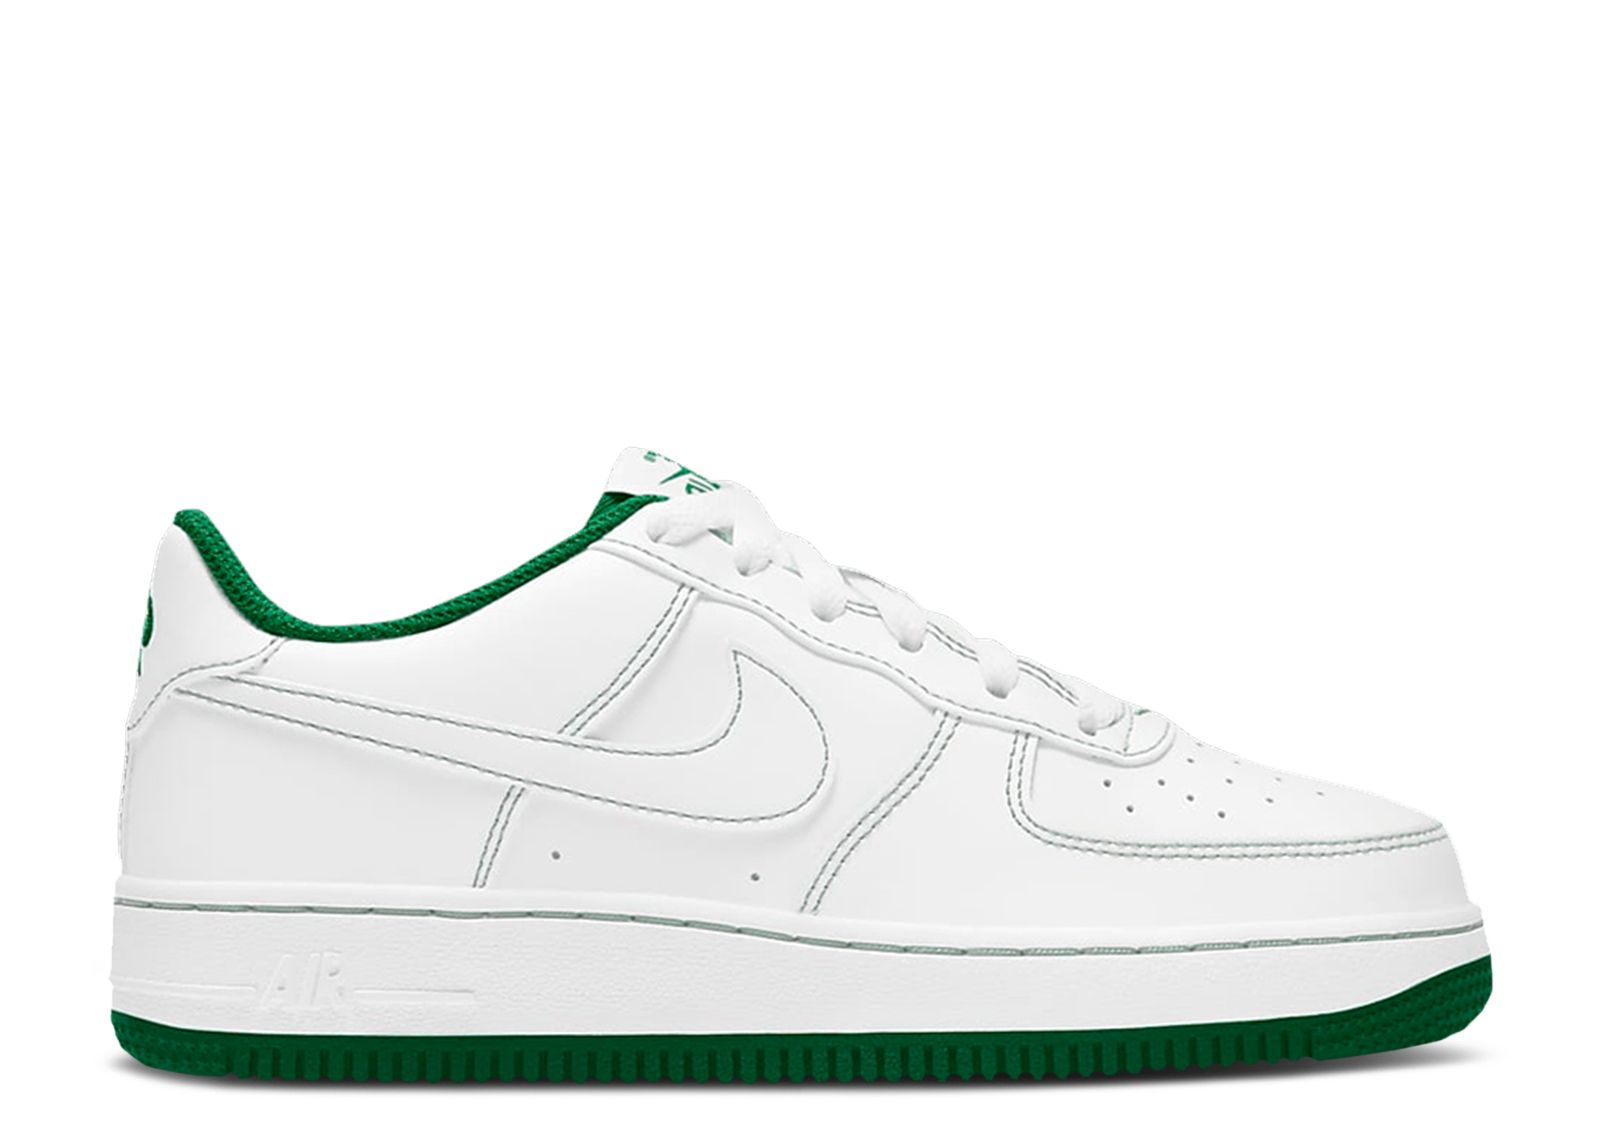 Second Chance - Nike Air bell 1 Low White Pine Green (GS) - 37,5 | NEW